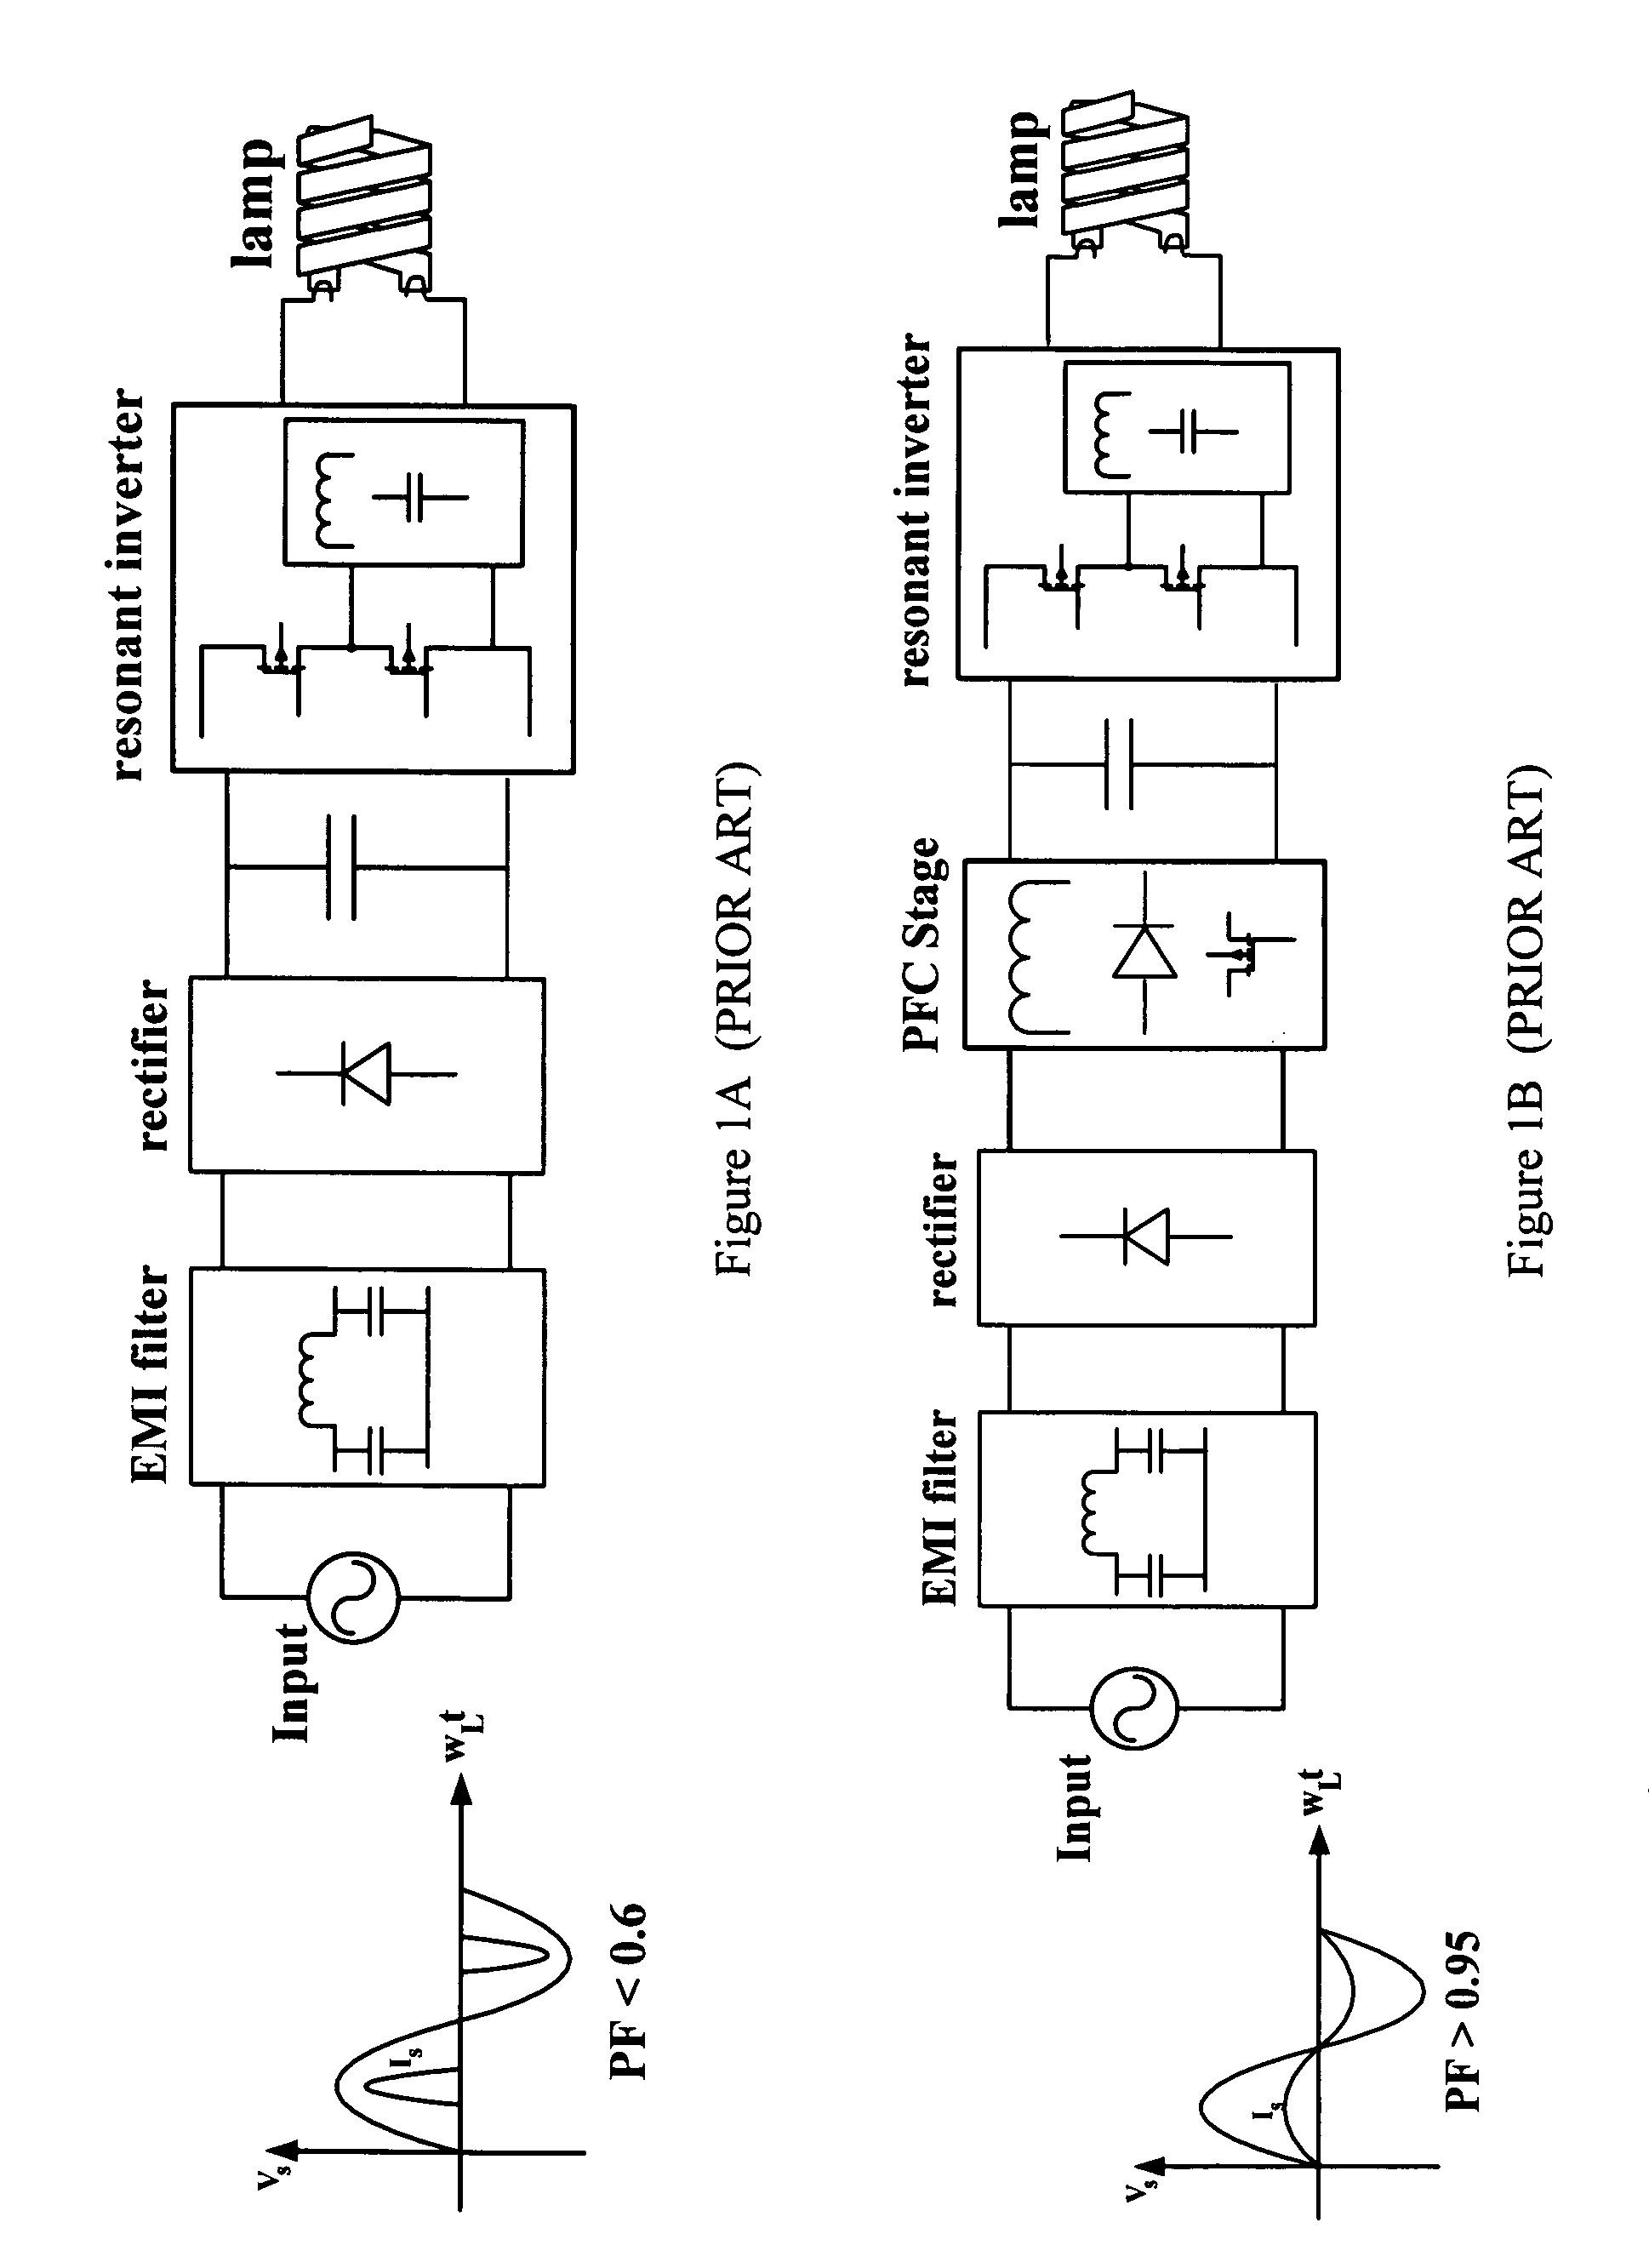 Electronic ballast with high power factor